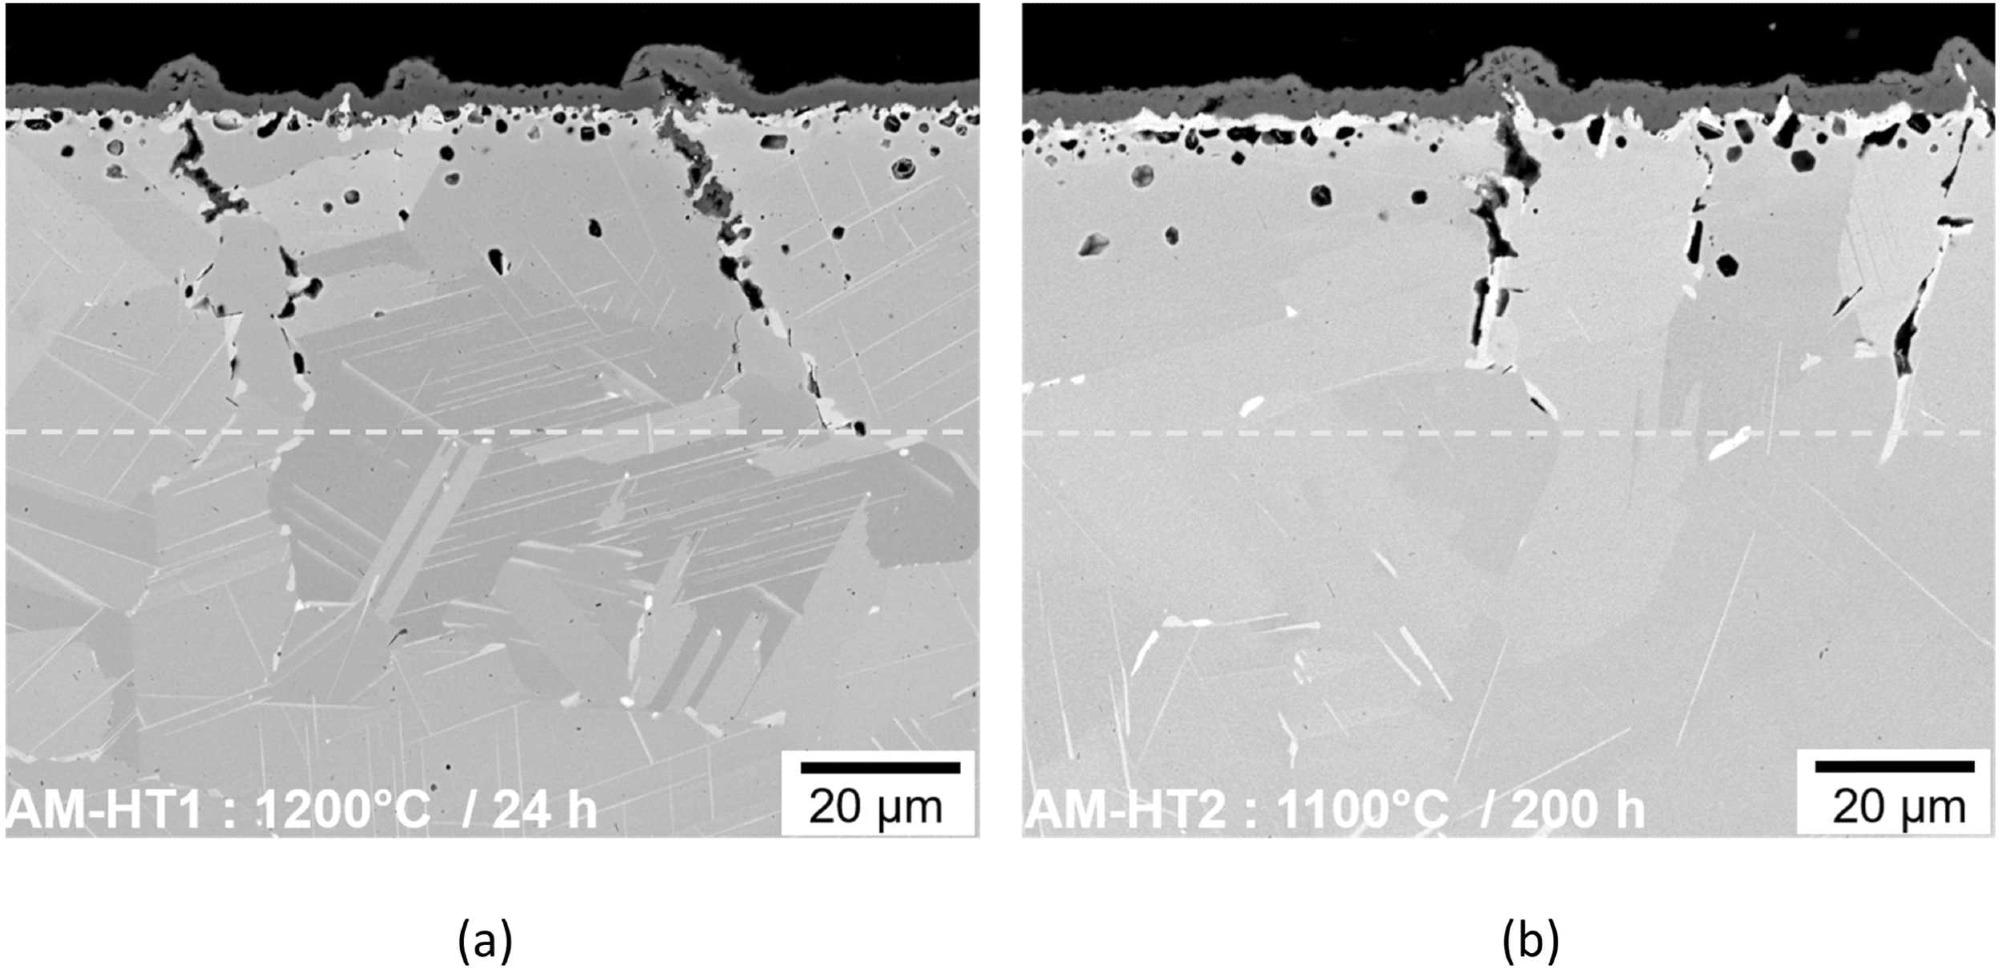 BSE images of oxide scales on heat-treated AM IN 625 after 168 h of air oxidation at 900 °C: (a) AM-HT1 (annealed for 24 h at 1200 °C) (b) AM-HT2: (annealed for 200 h at 1100 °C).